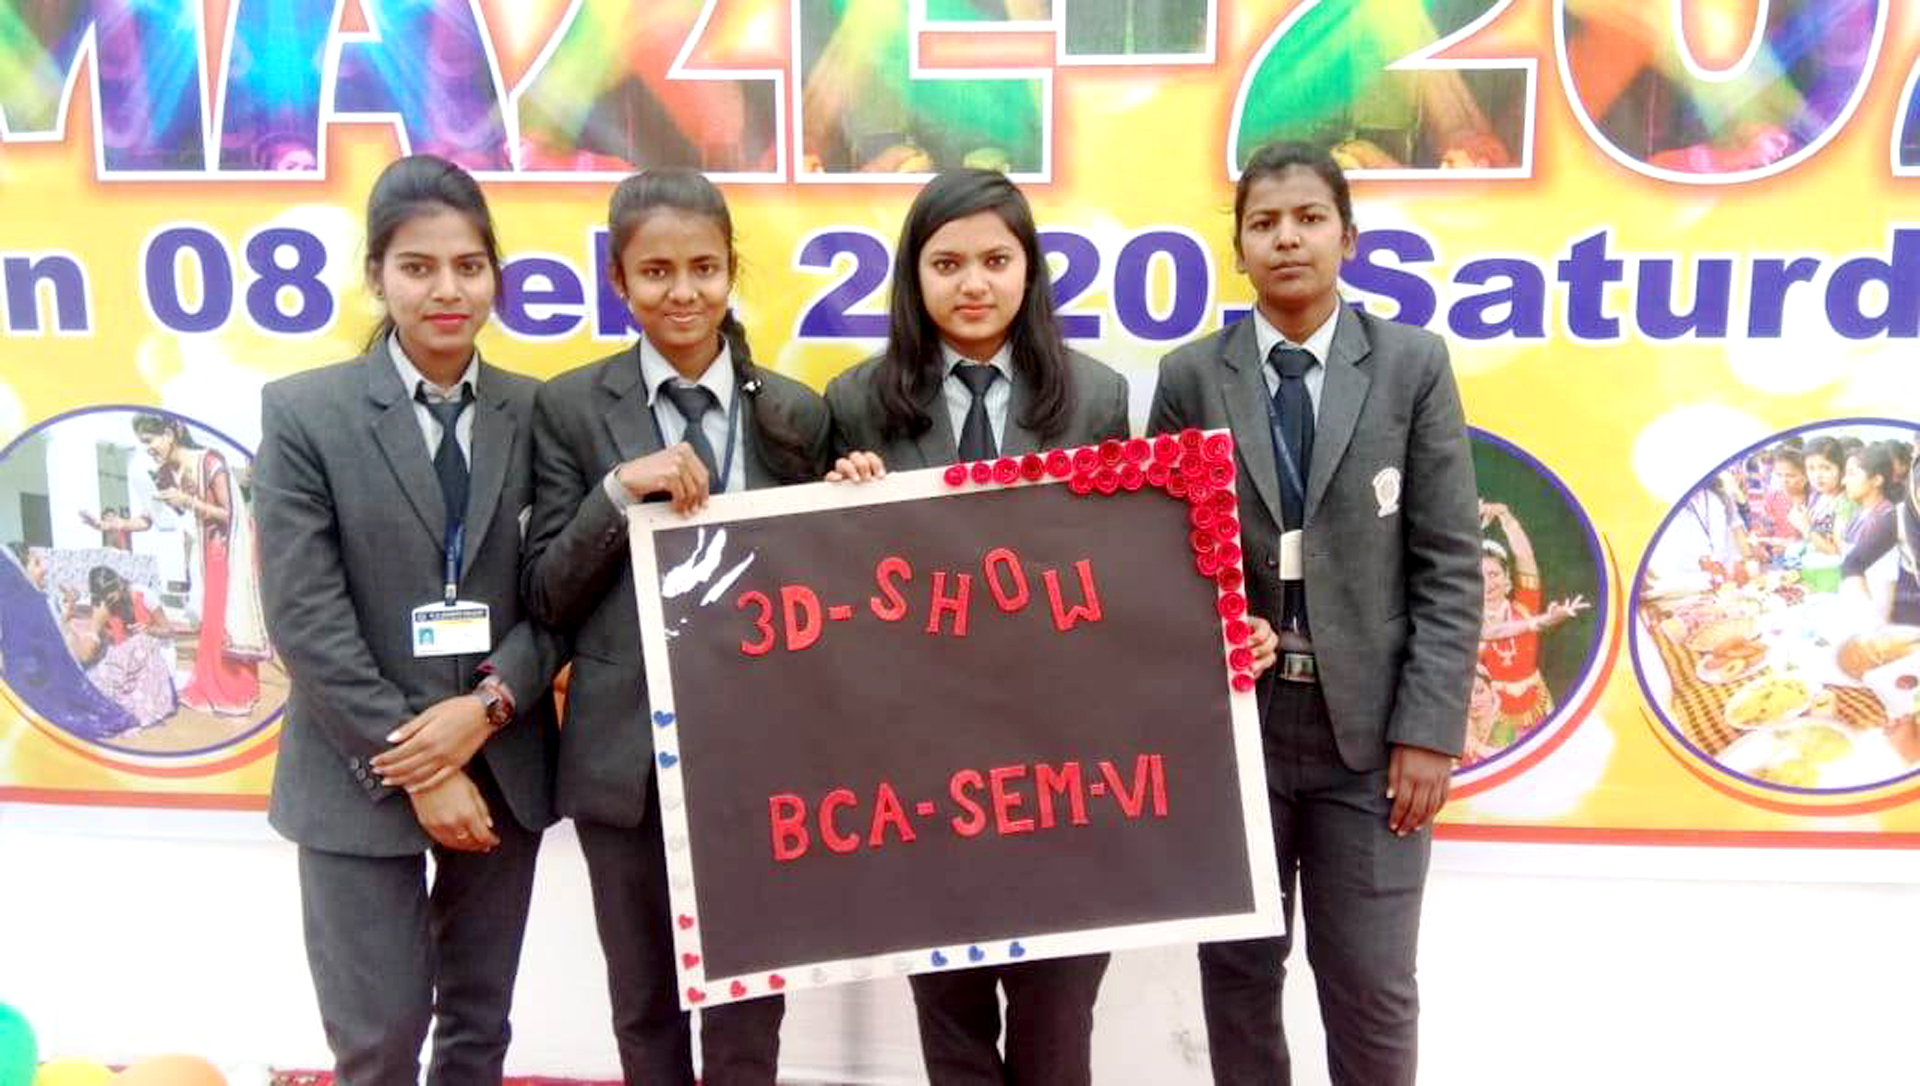 3D show presented by Sem-6th students of BCA Dept.